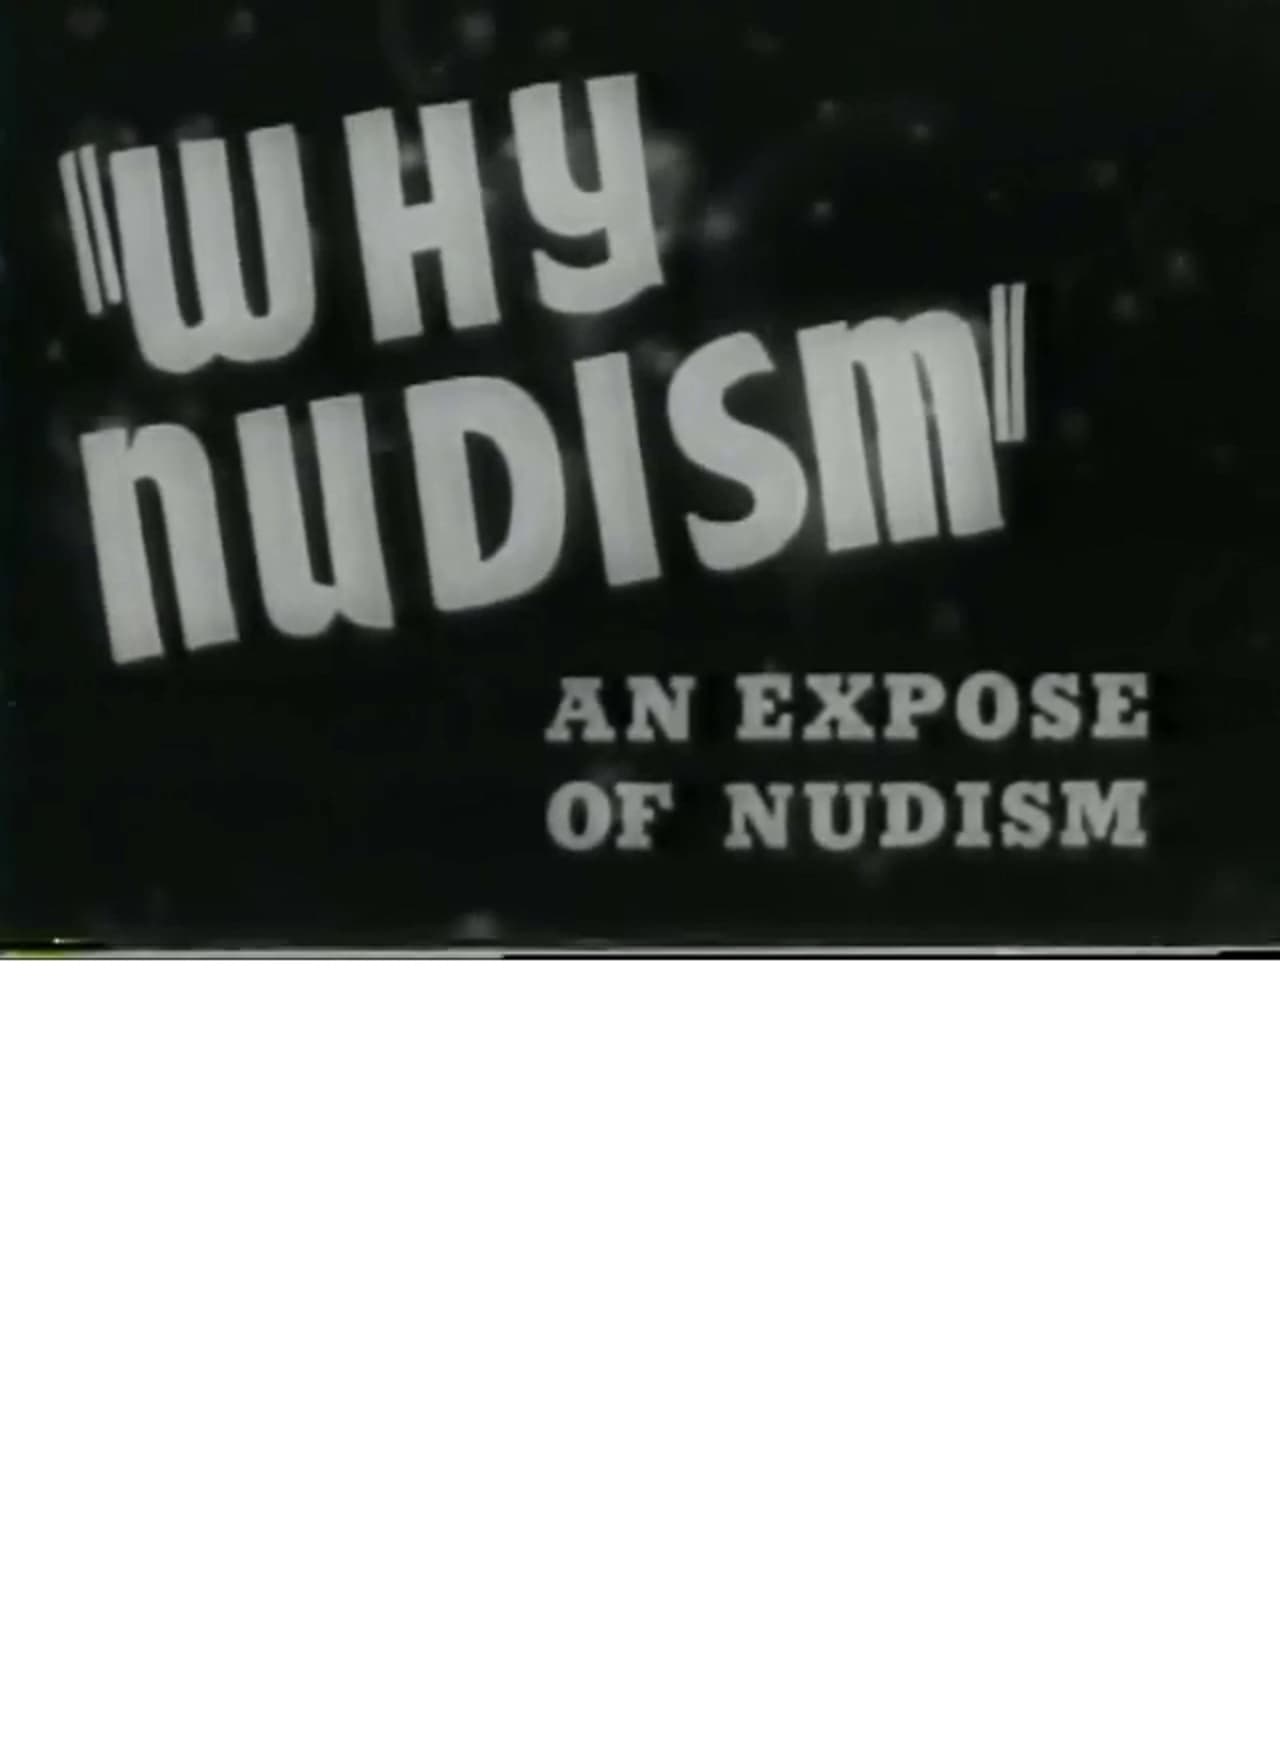 Why Nudism: An Expose of Nudism